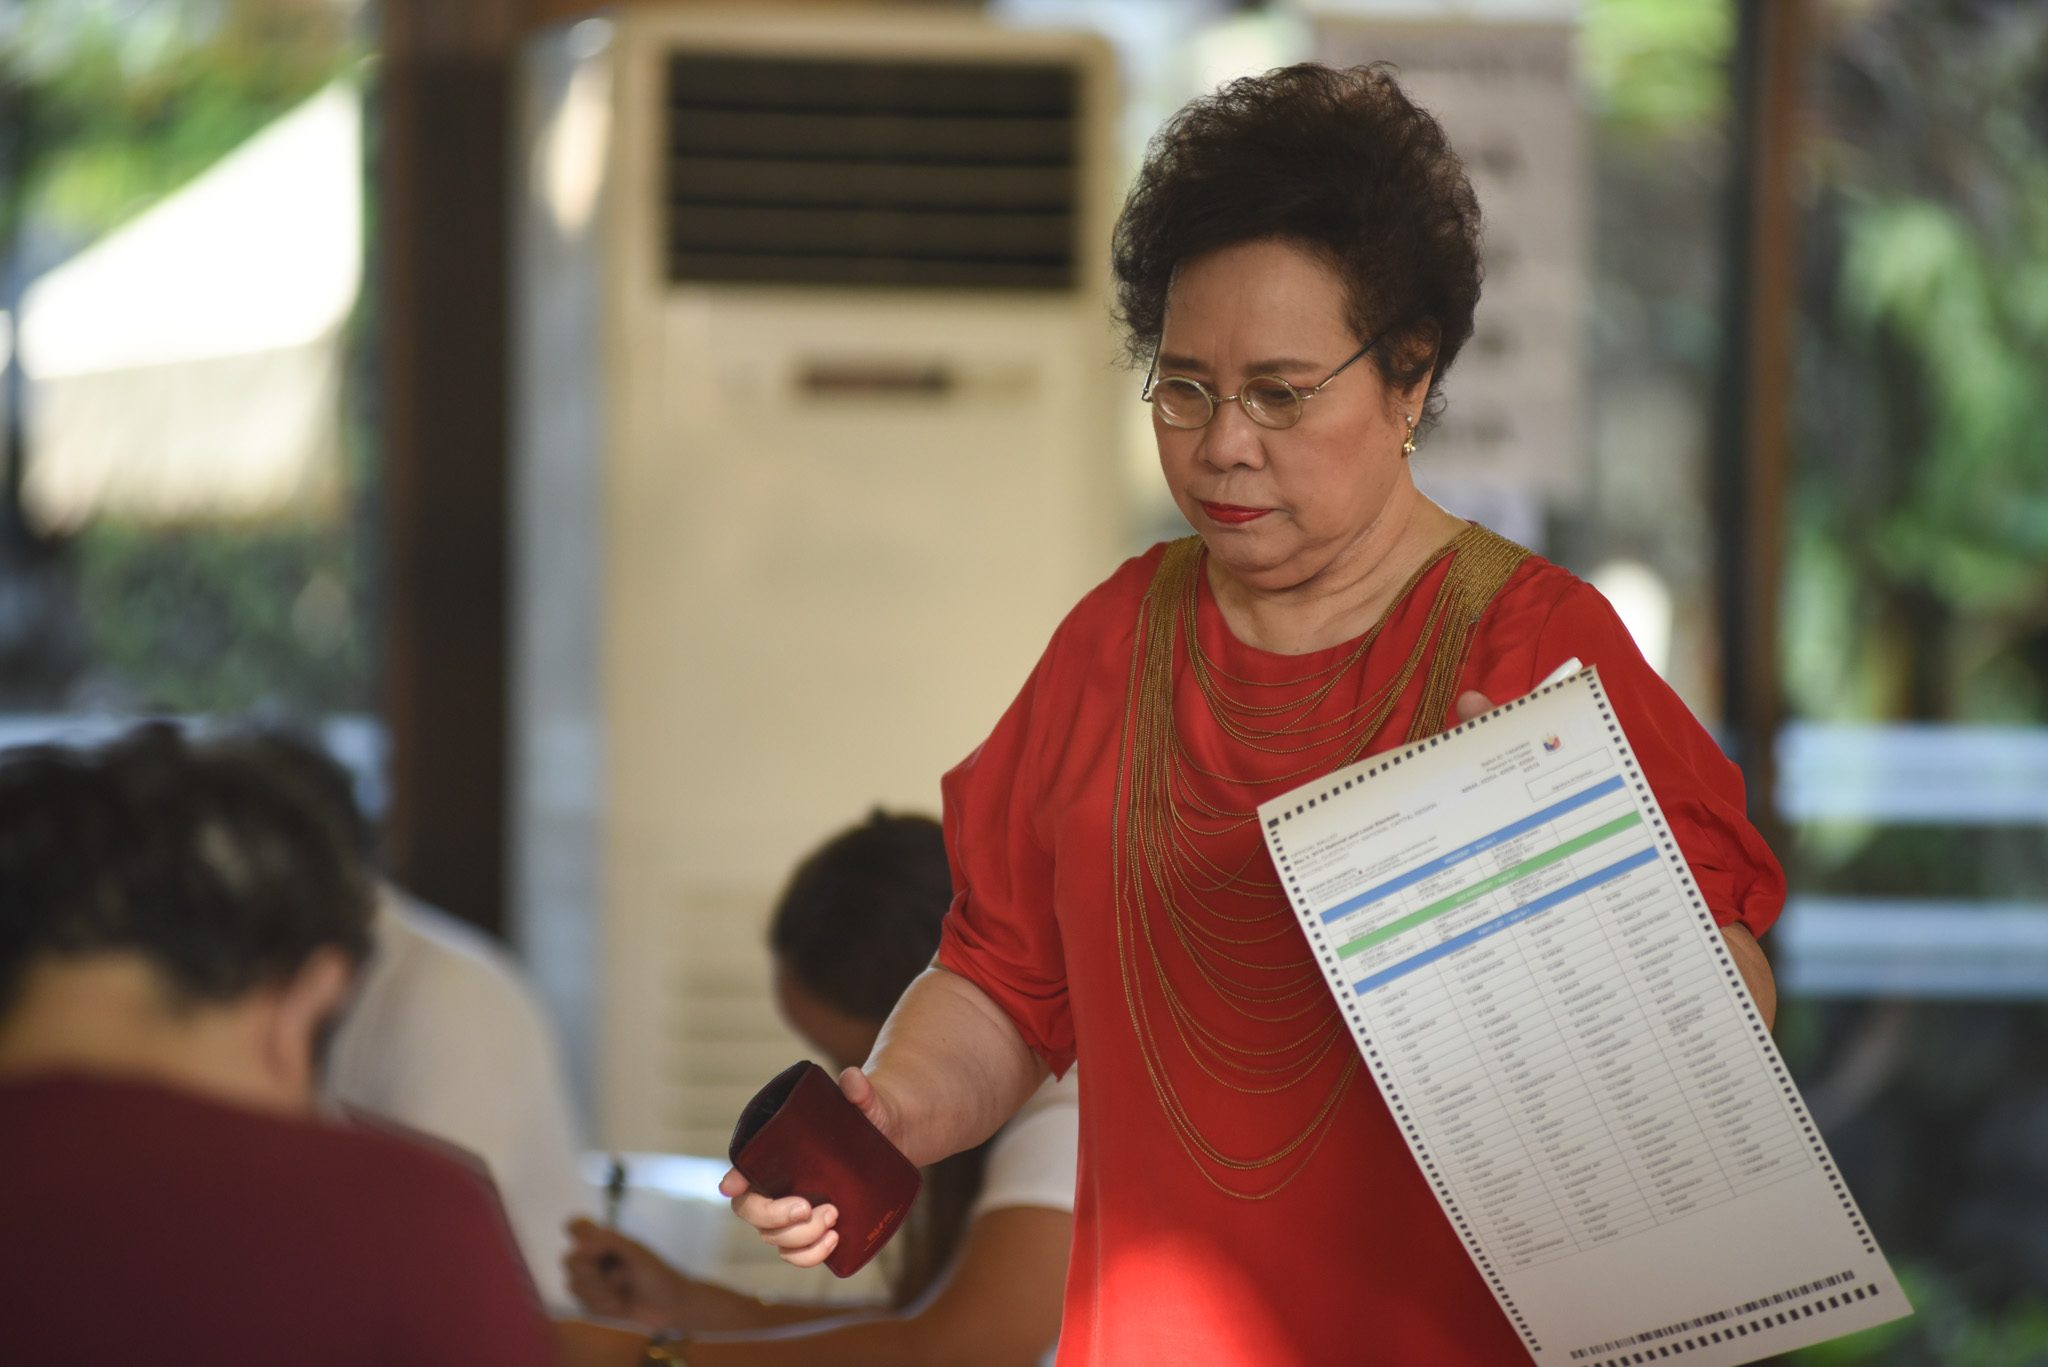 A month before term ends, Miriam ‘still on leave for cancer’